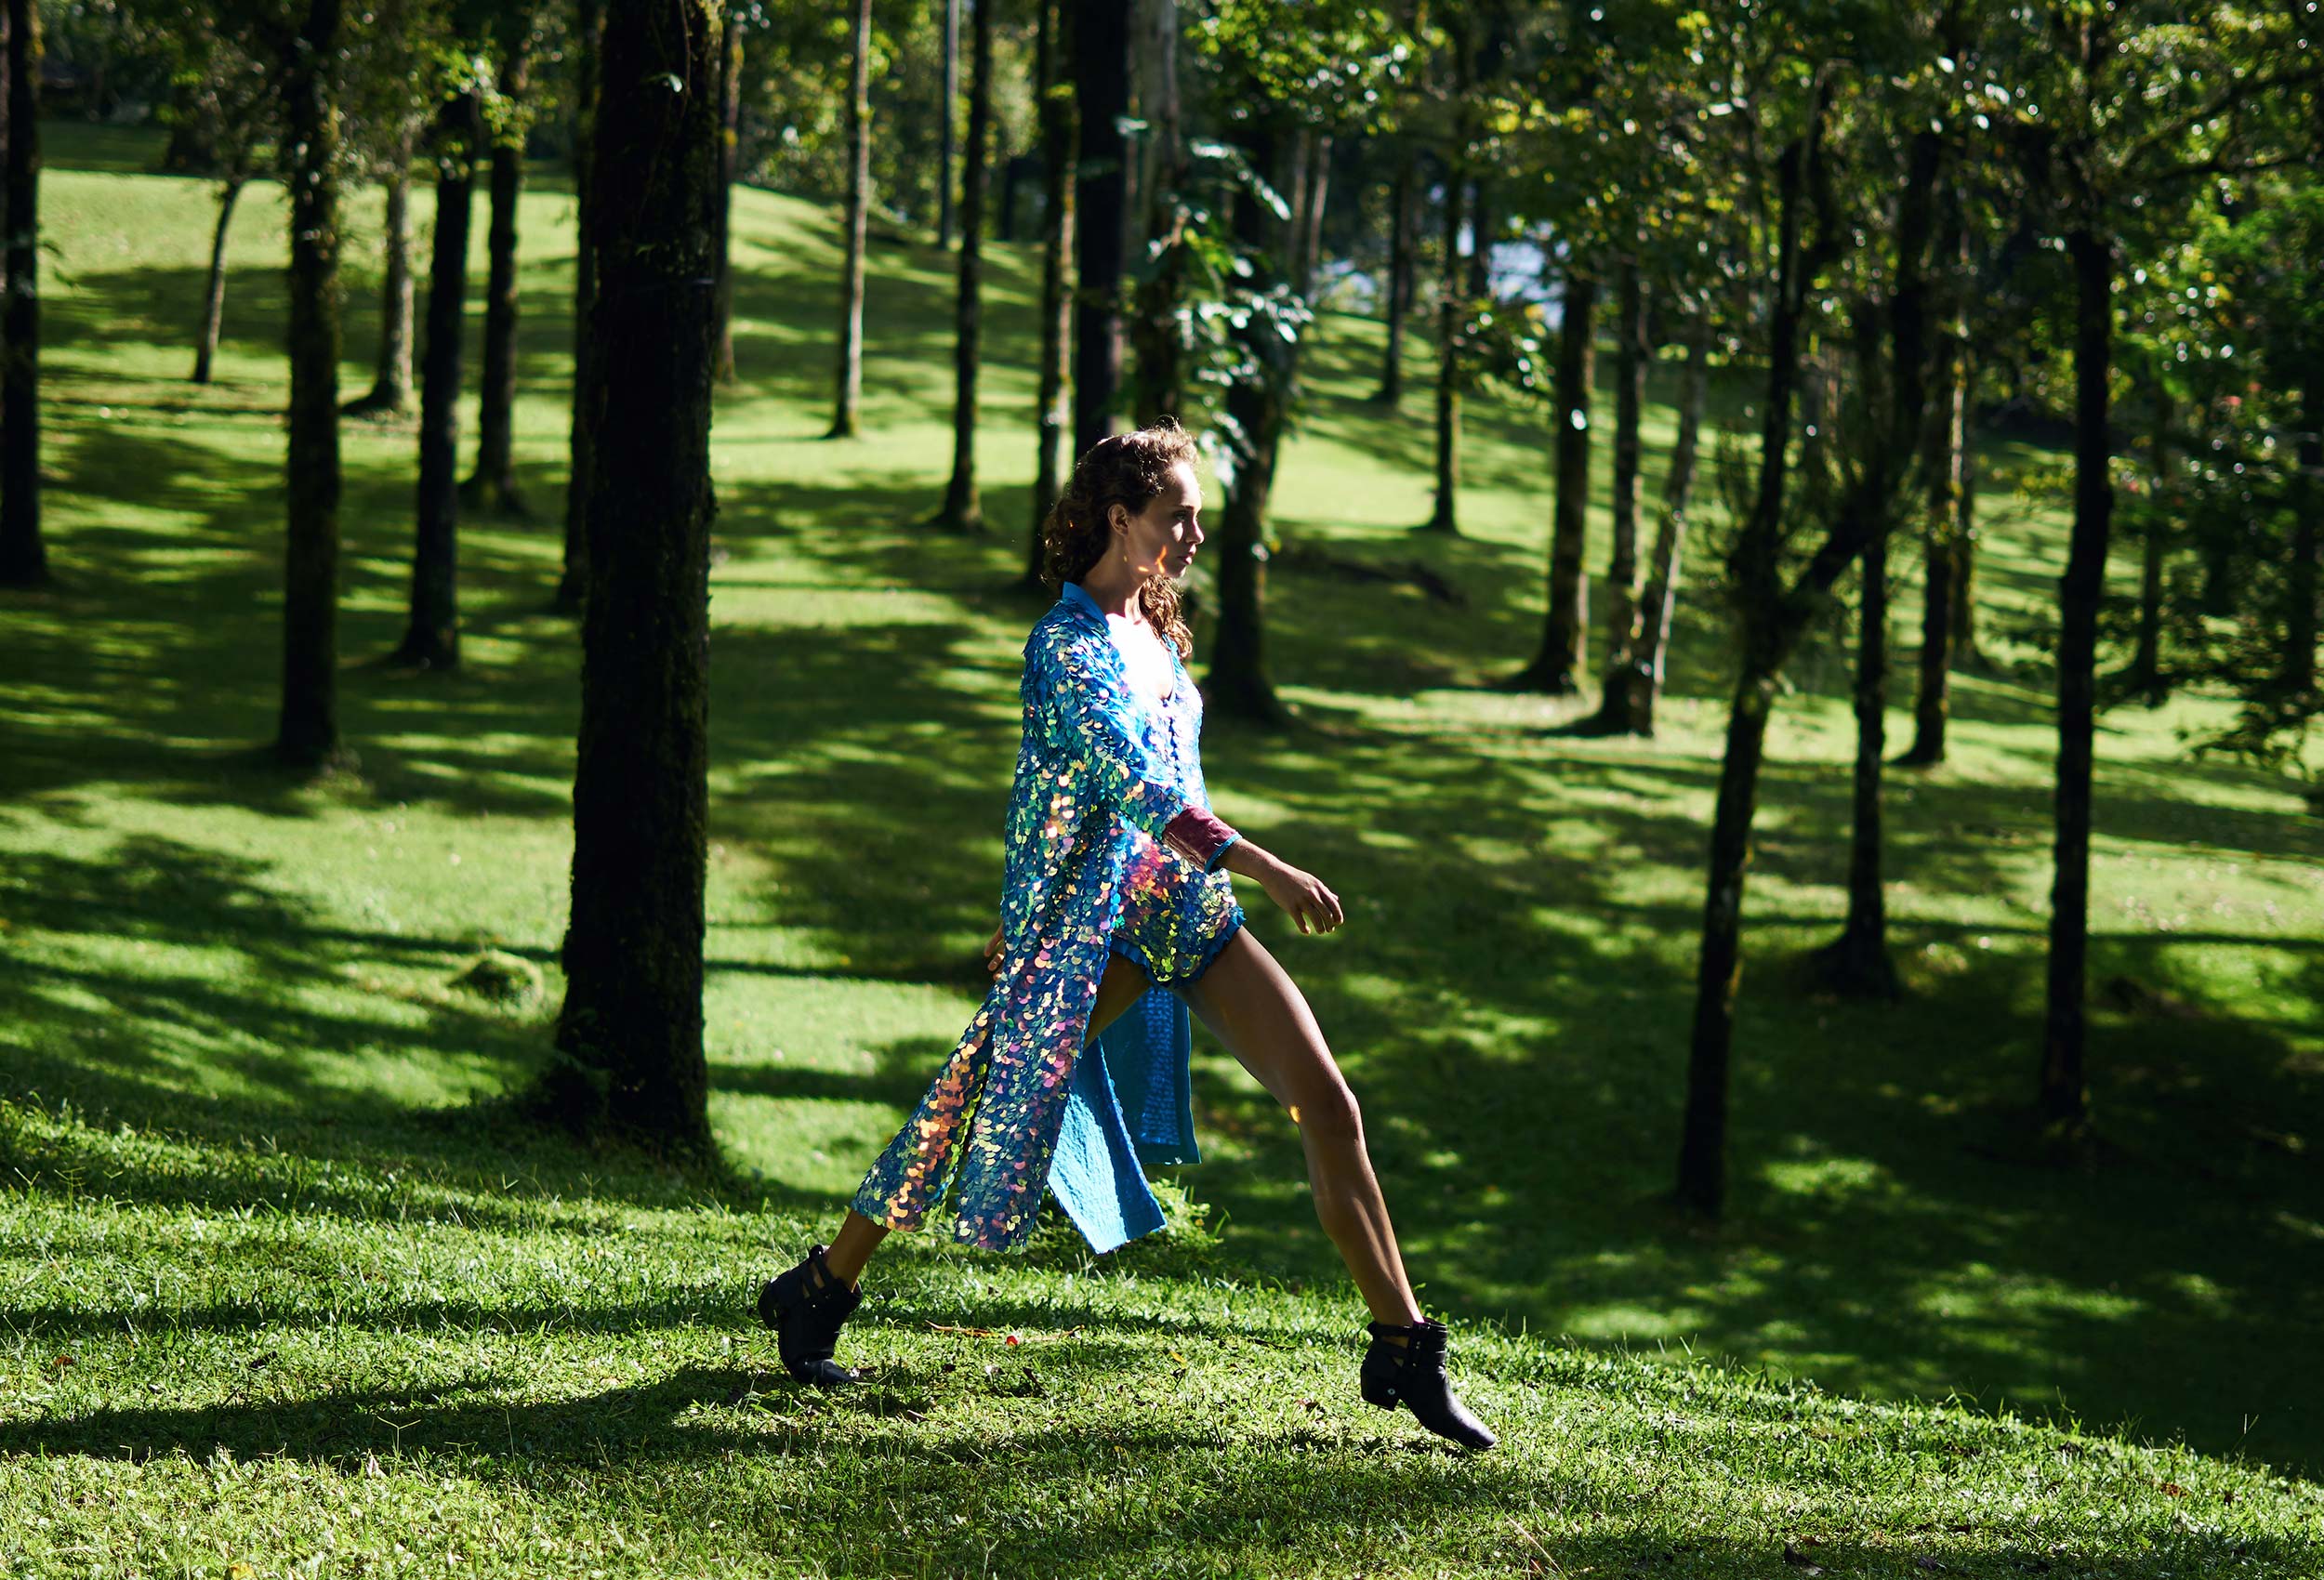 woman in a long kimono covered in large round blue iridescent sequins taking a big stride amongst trees in a grassy landscape